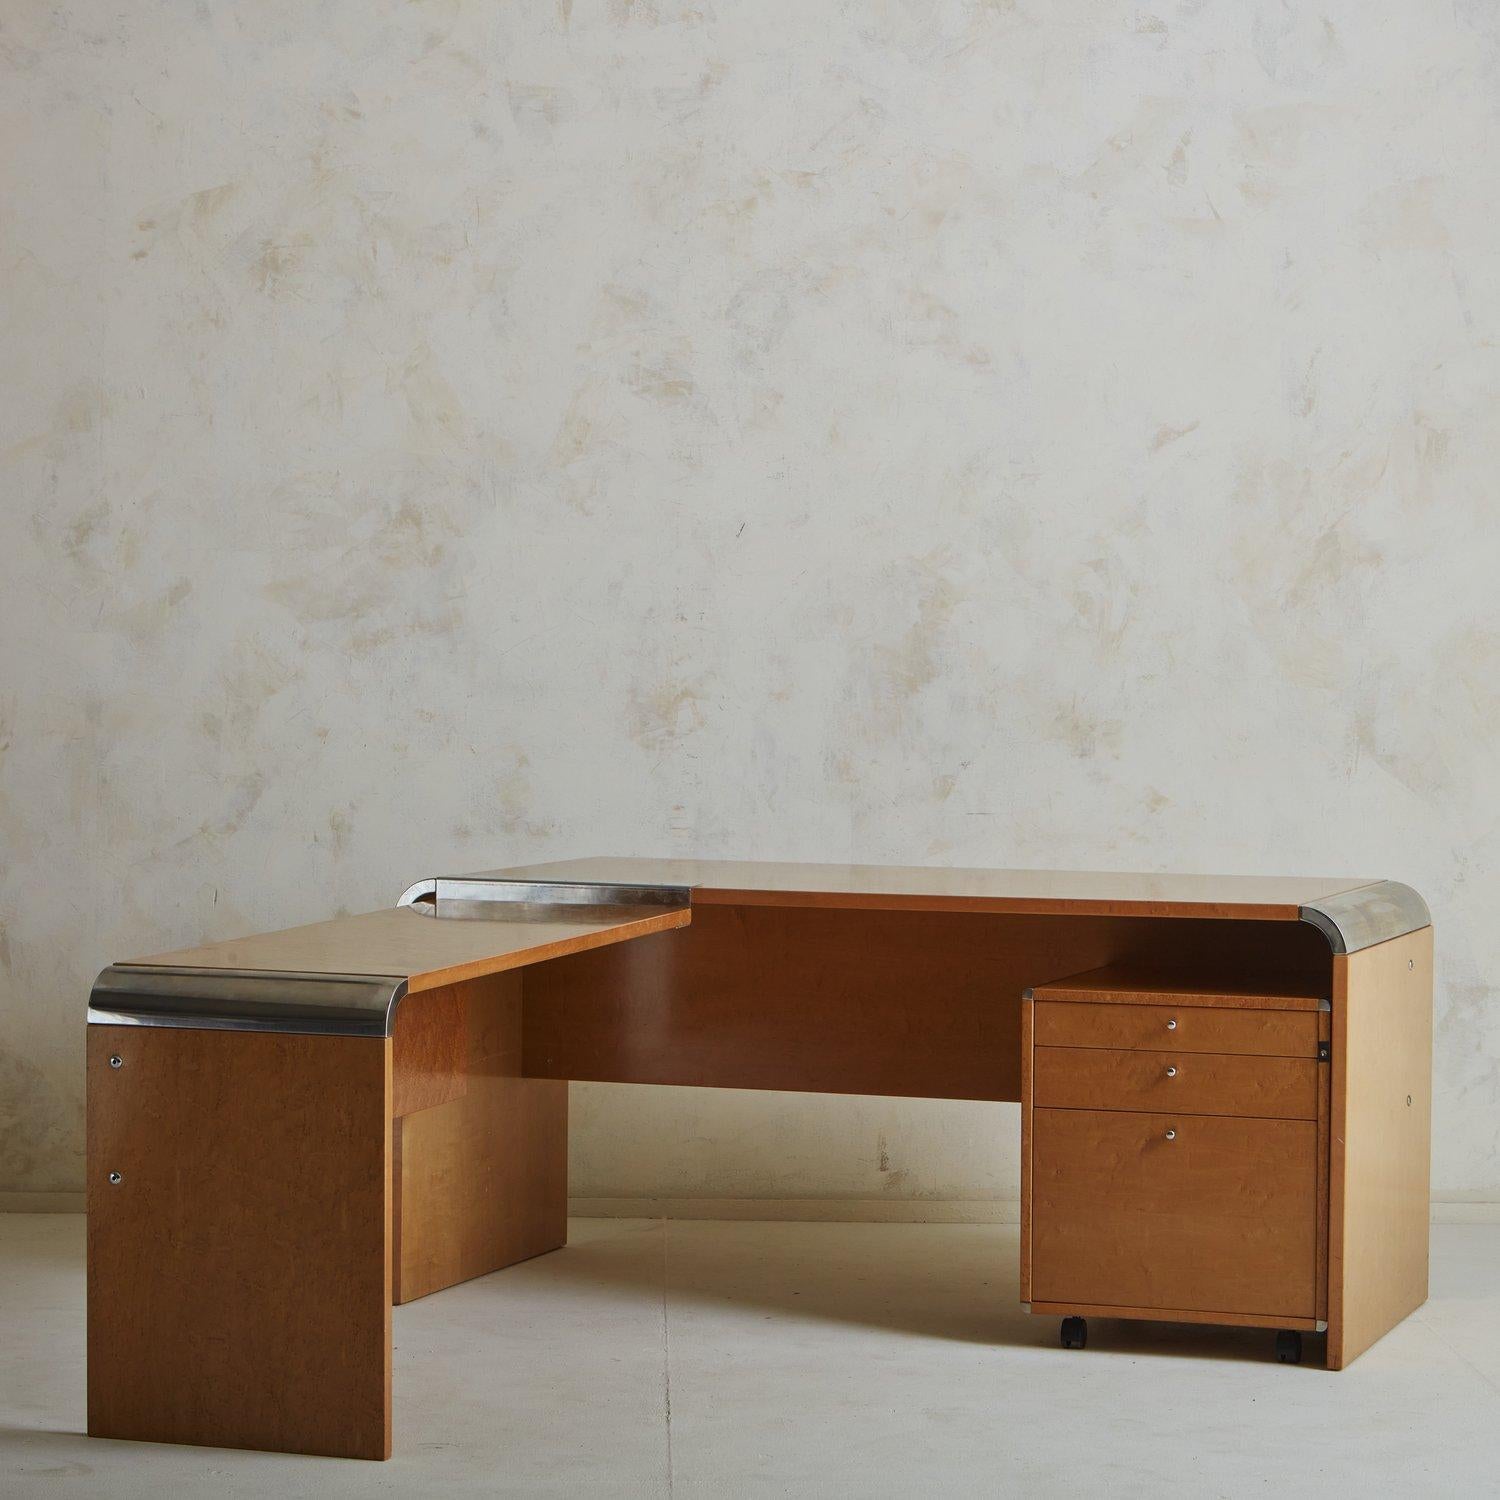 A rare Italian desk unit designed by Giovanni Offredi for Saporiti in the 1970s. This desk has one main section with an additional table top attachment, creating an L-shape. It was constructed with wood and has a maple wood veneer with an exquisite